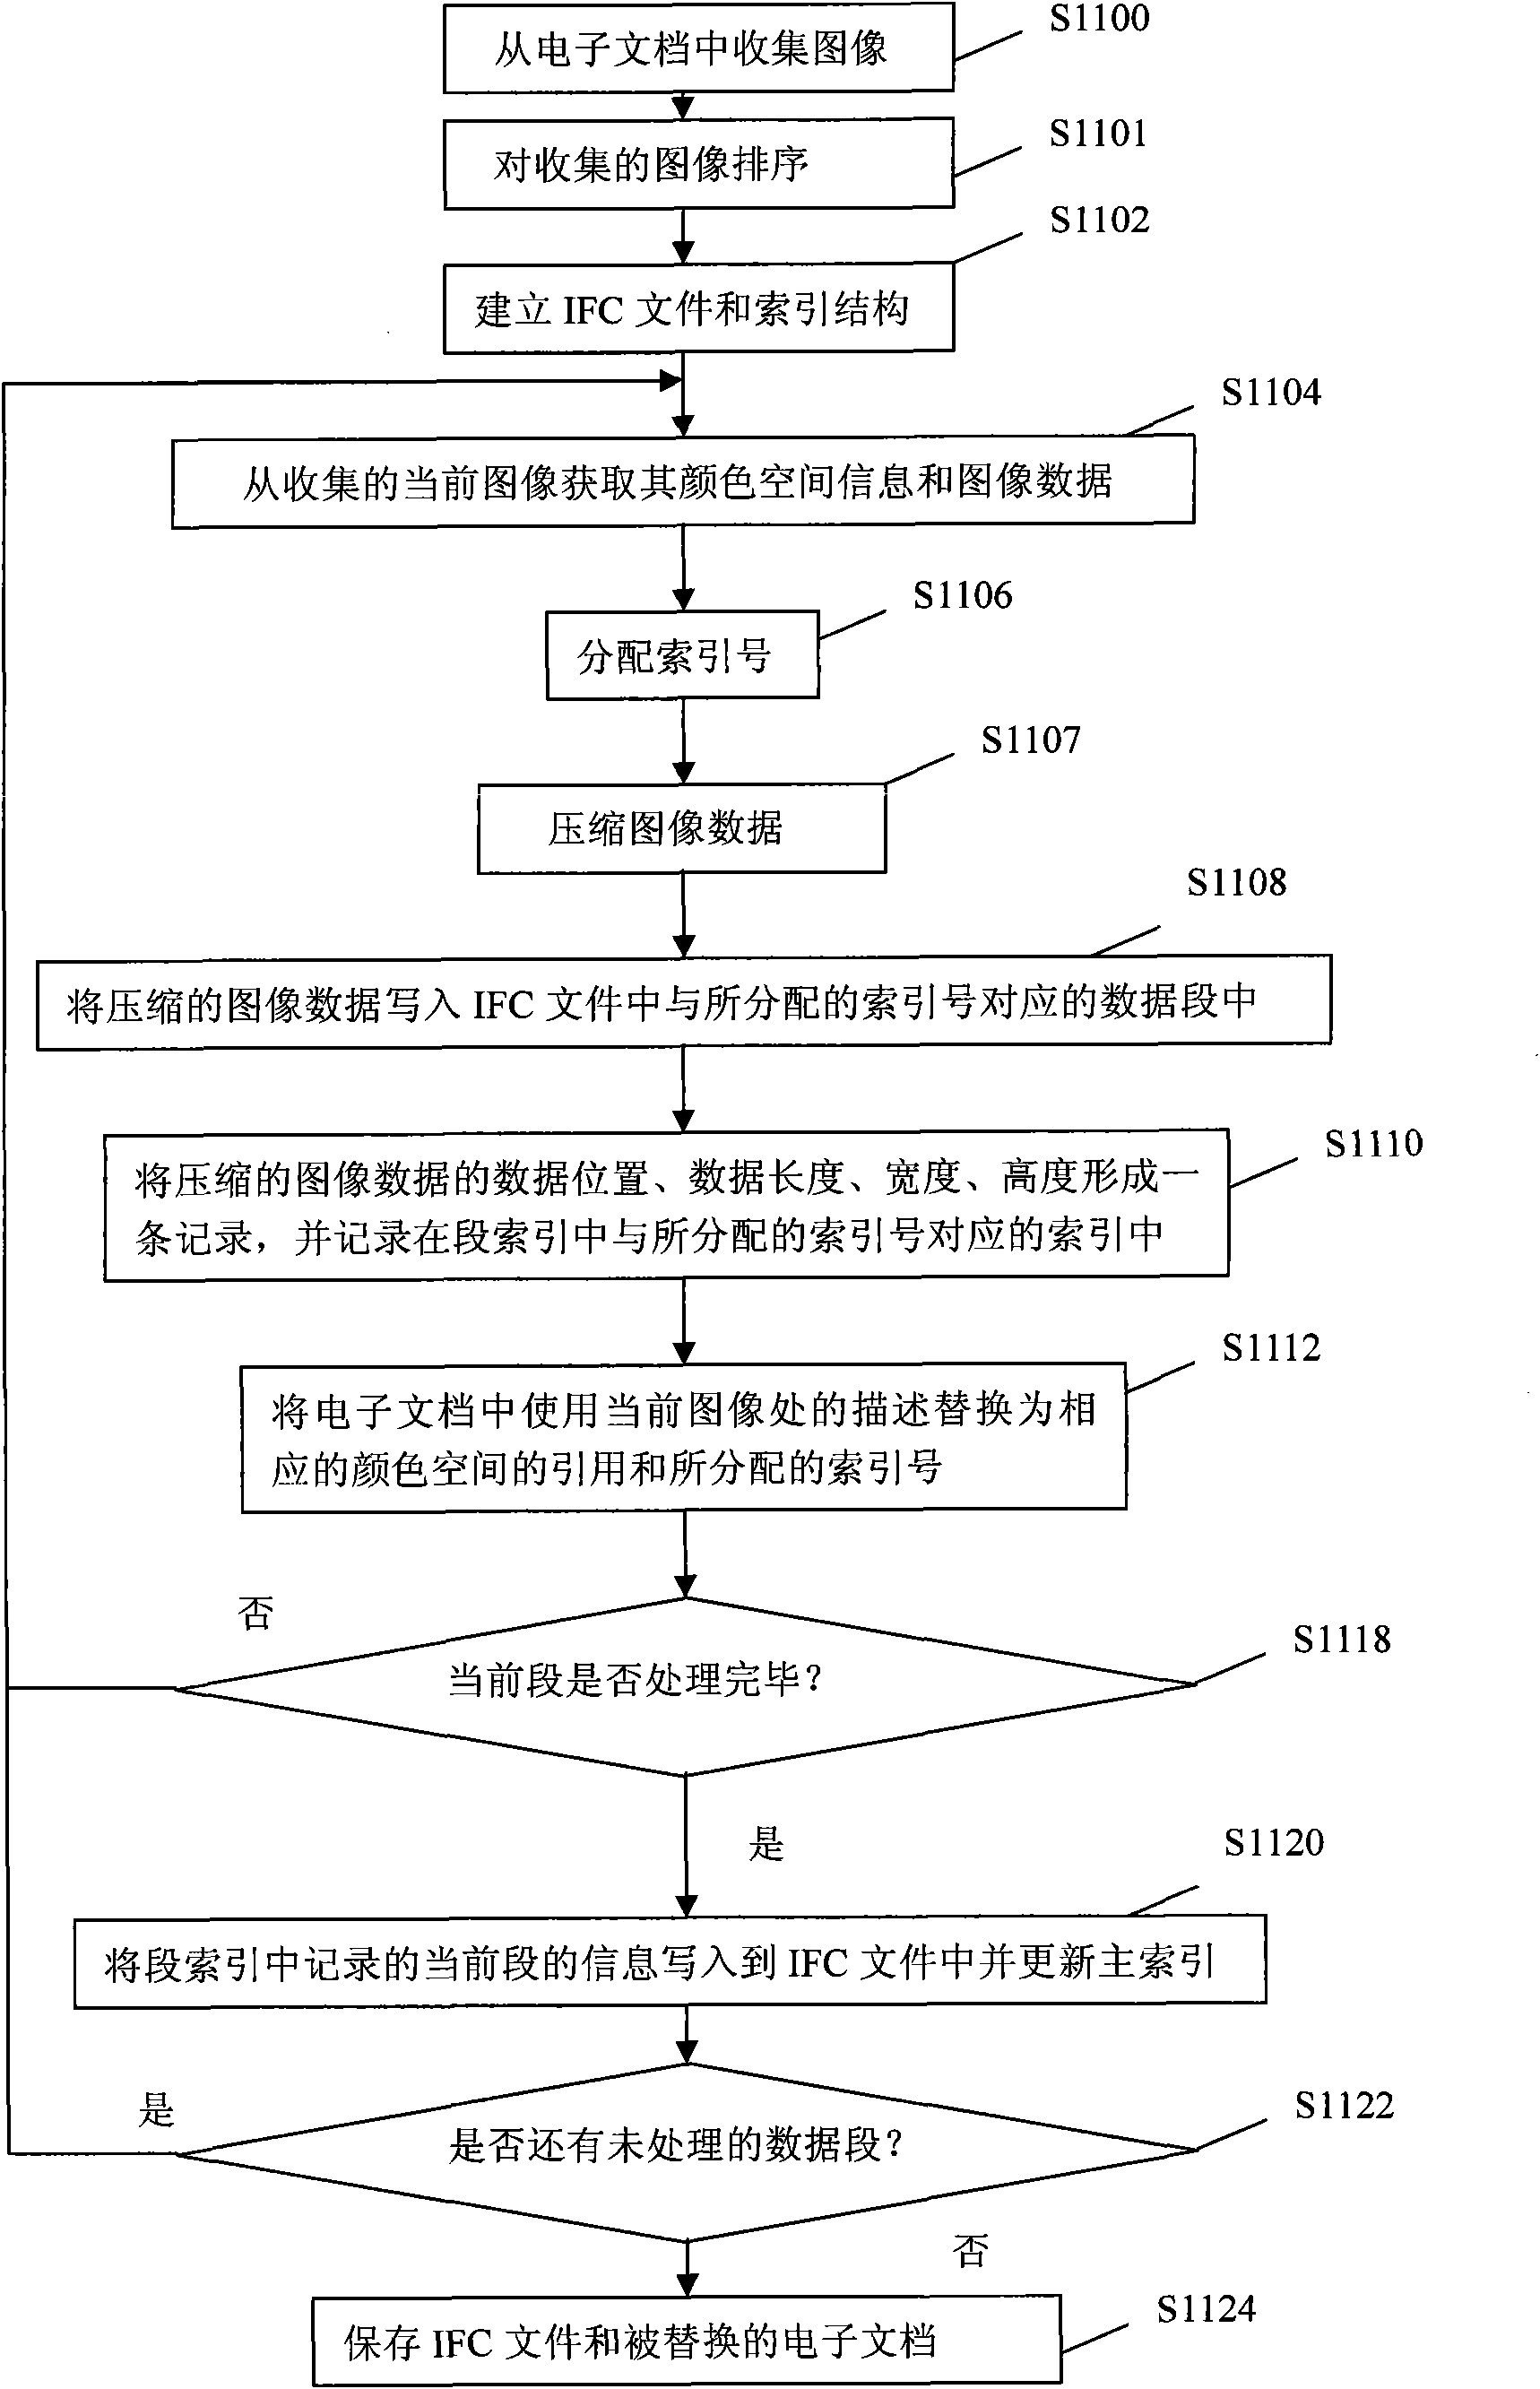 Image data processing method of electronic document and device thereof